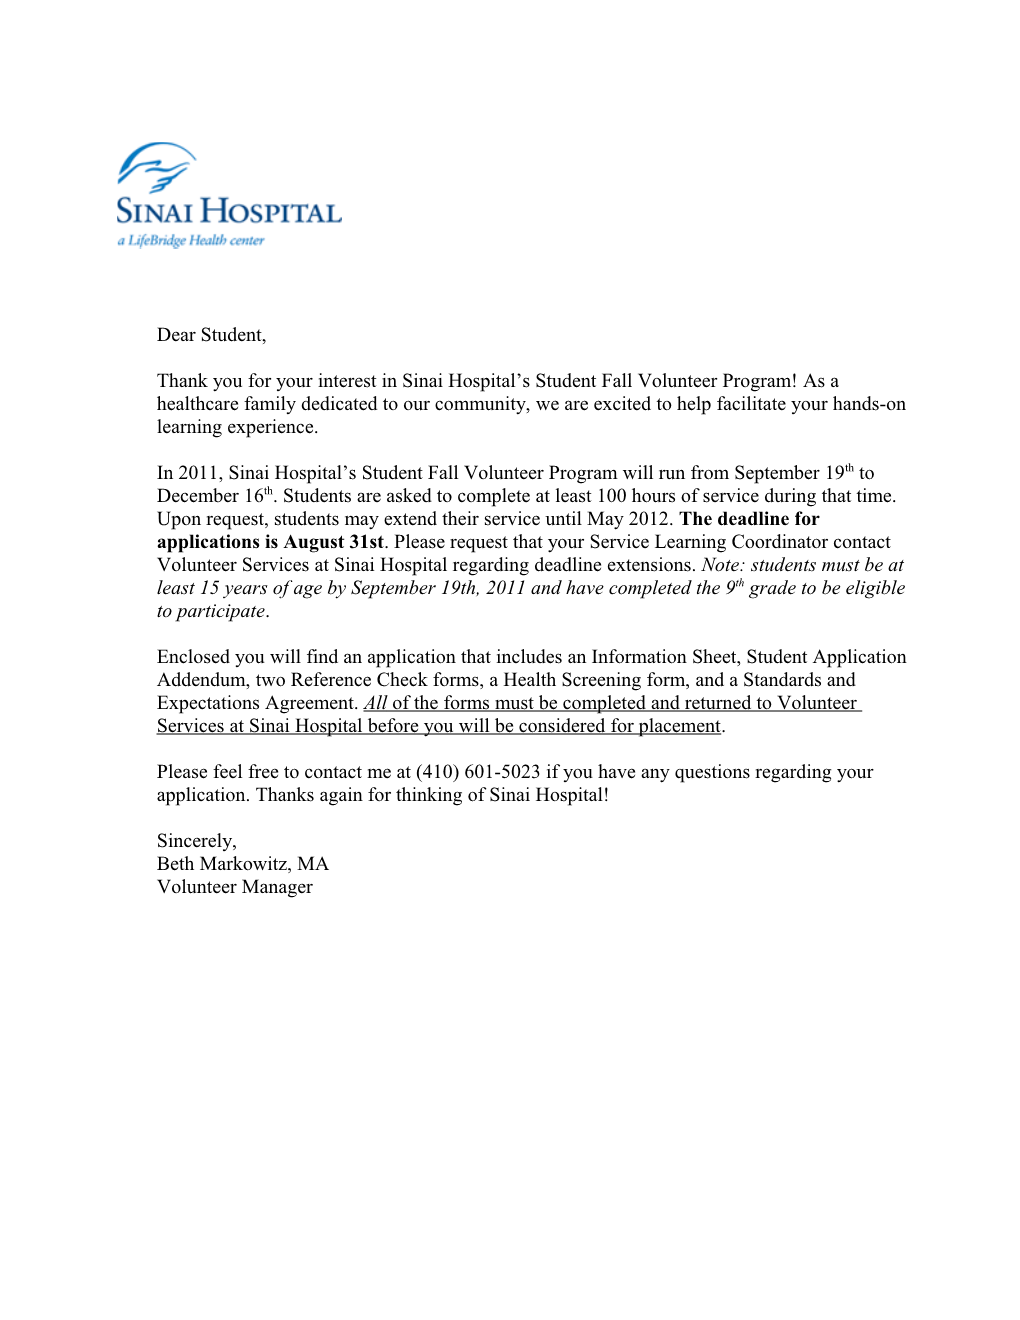 Thank You for Your Interest in Sinaihospital S Student Fall Volunteer Program! As a Healthcare